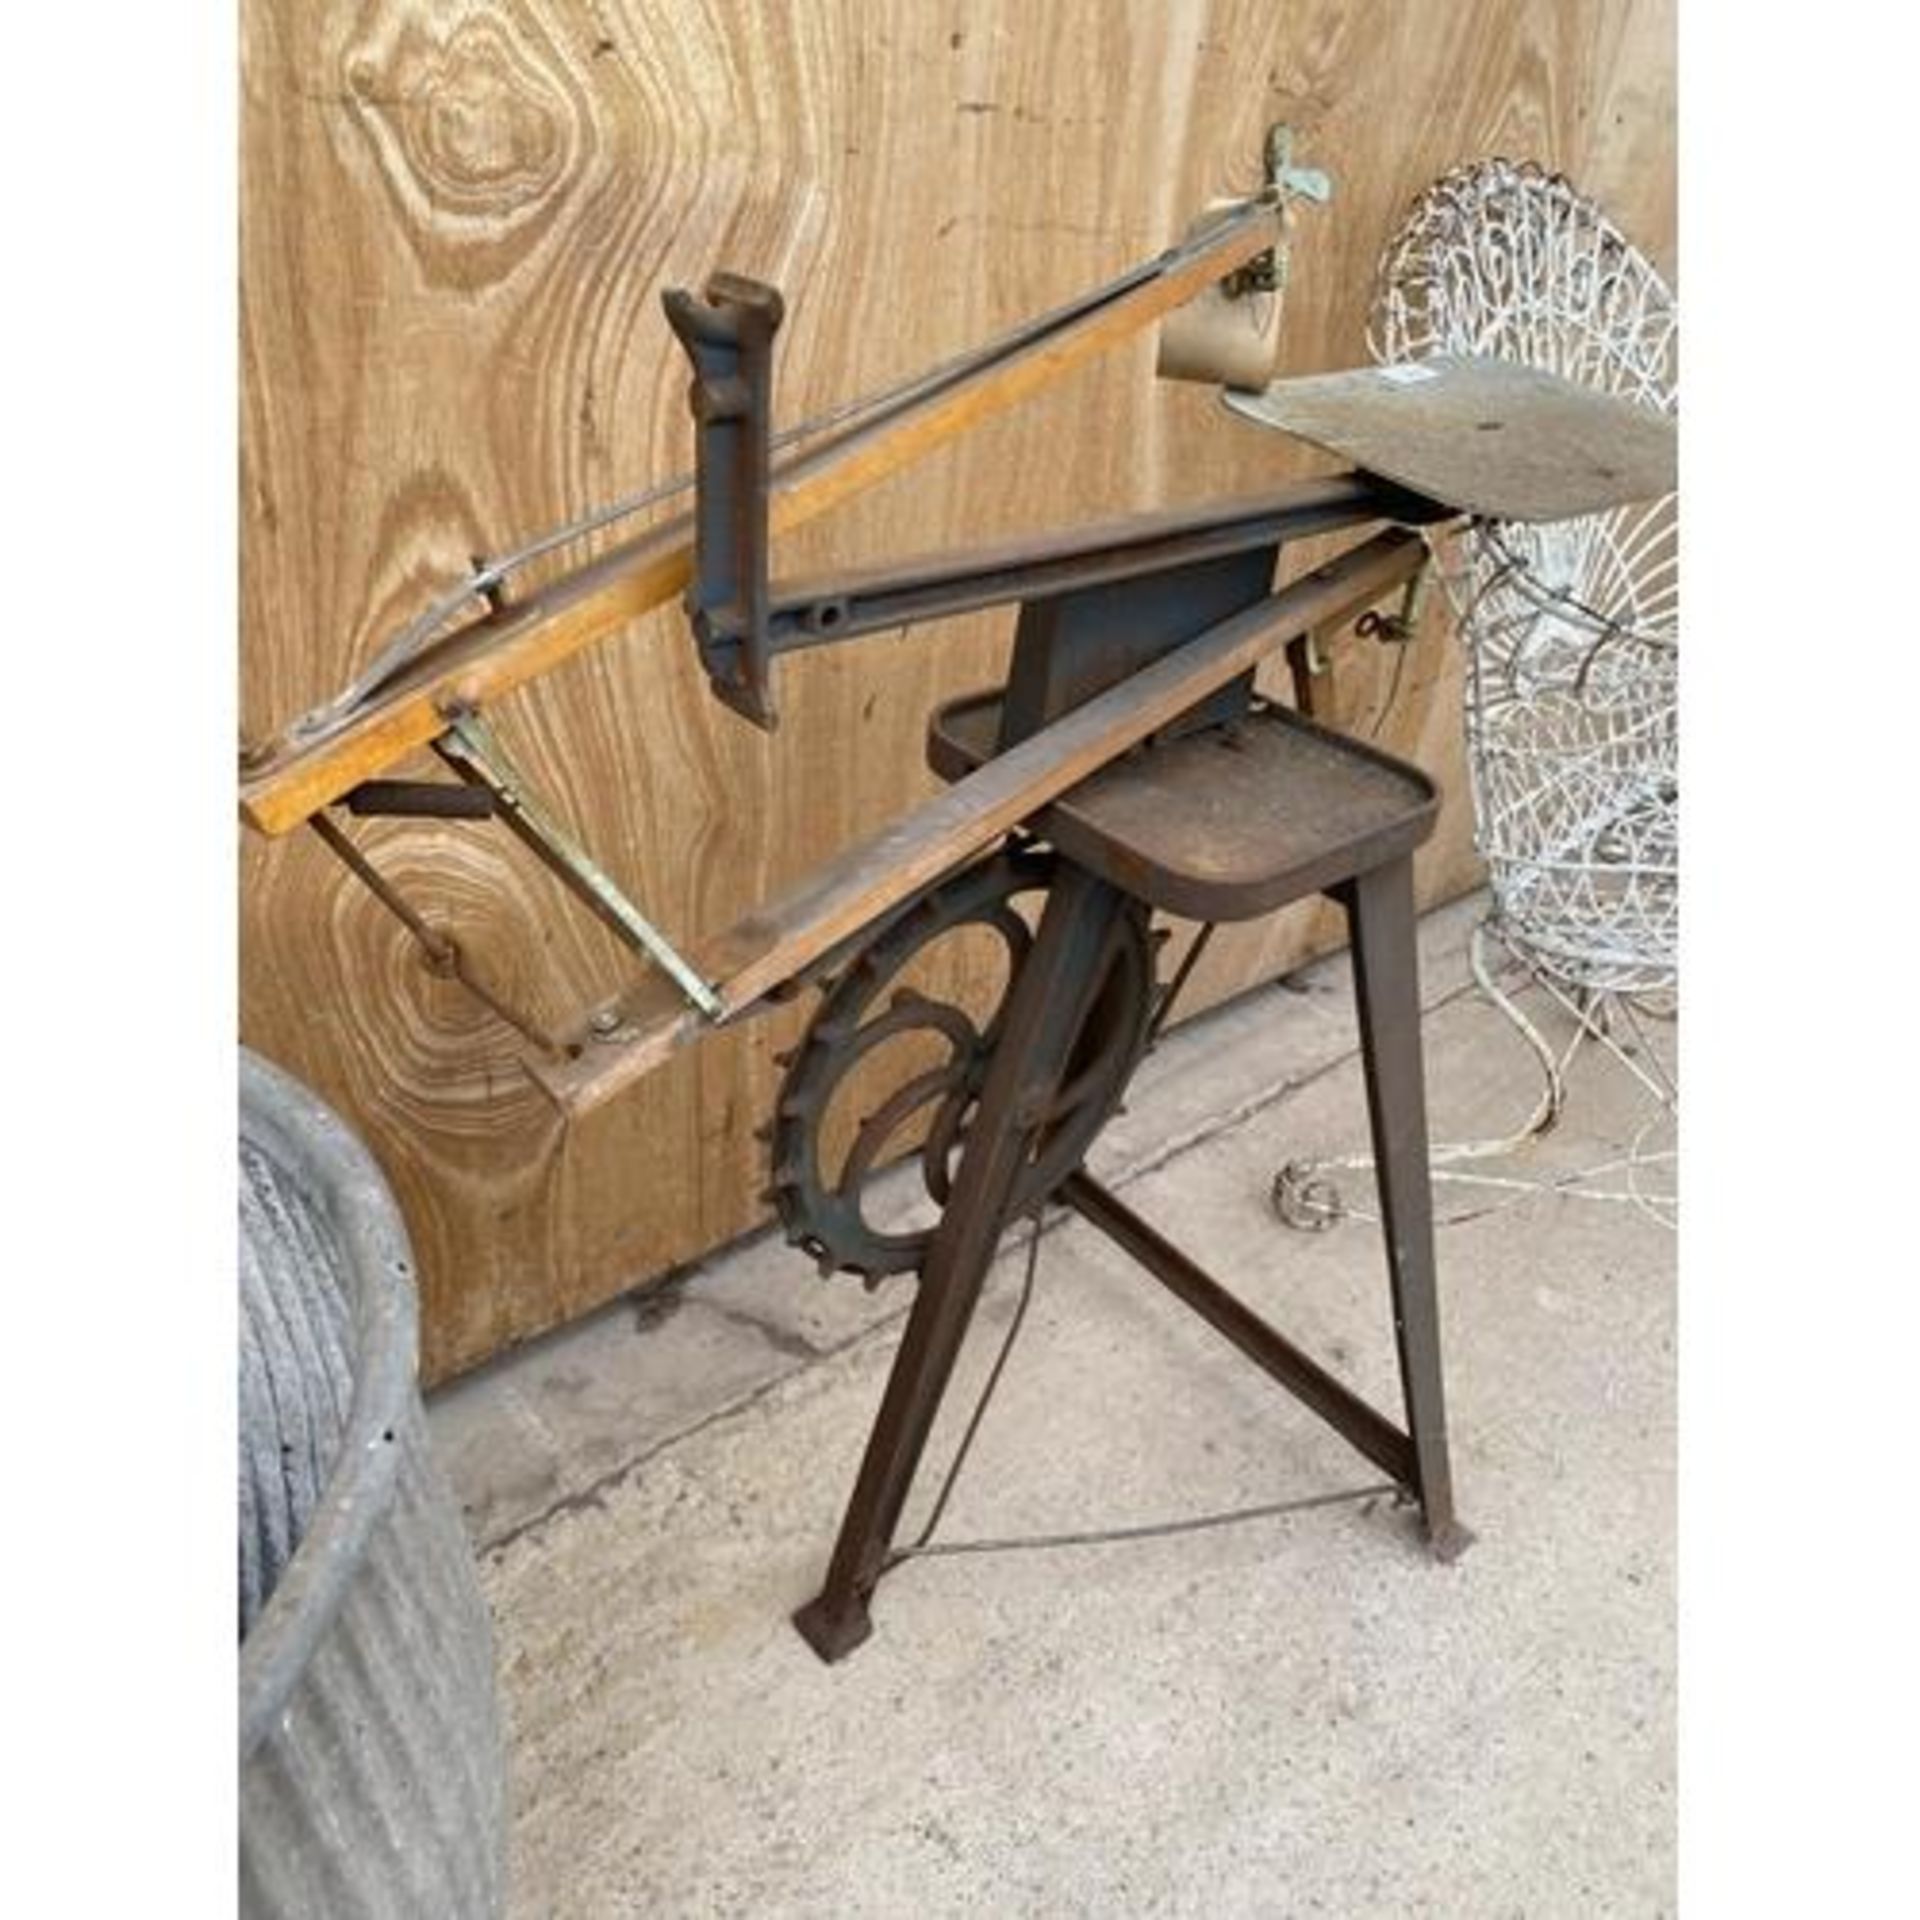 A VINTAGE SCROLL SAW WITH TRIPOD BASE - Image 3 of 3